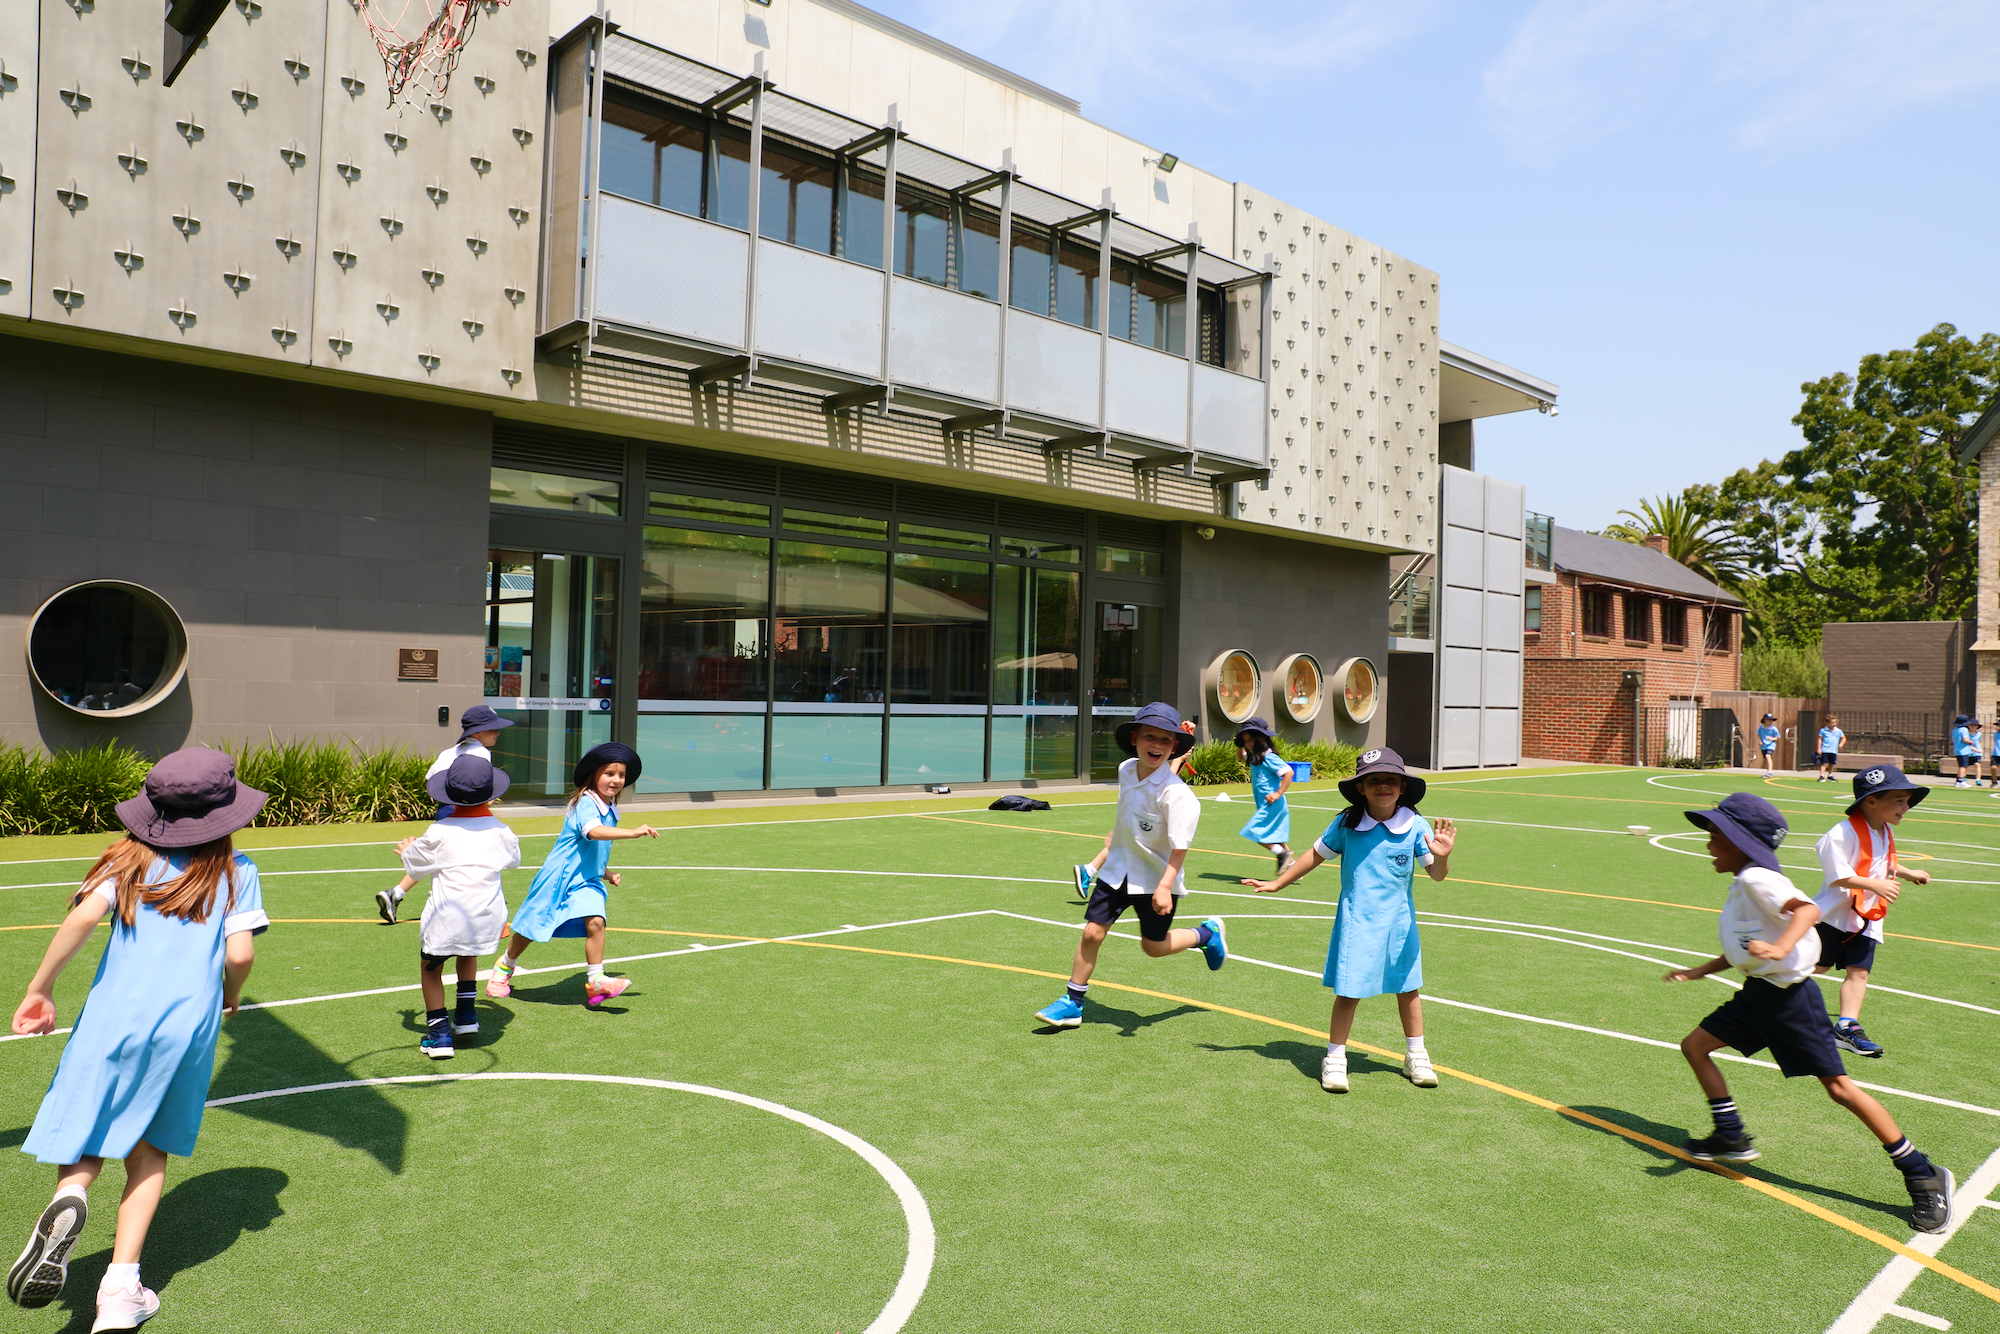 primary school kids in school uniforms playing on a quad court